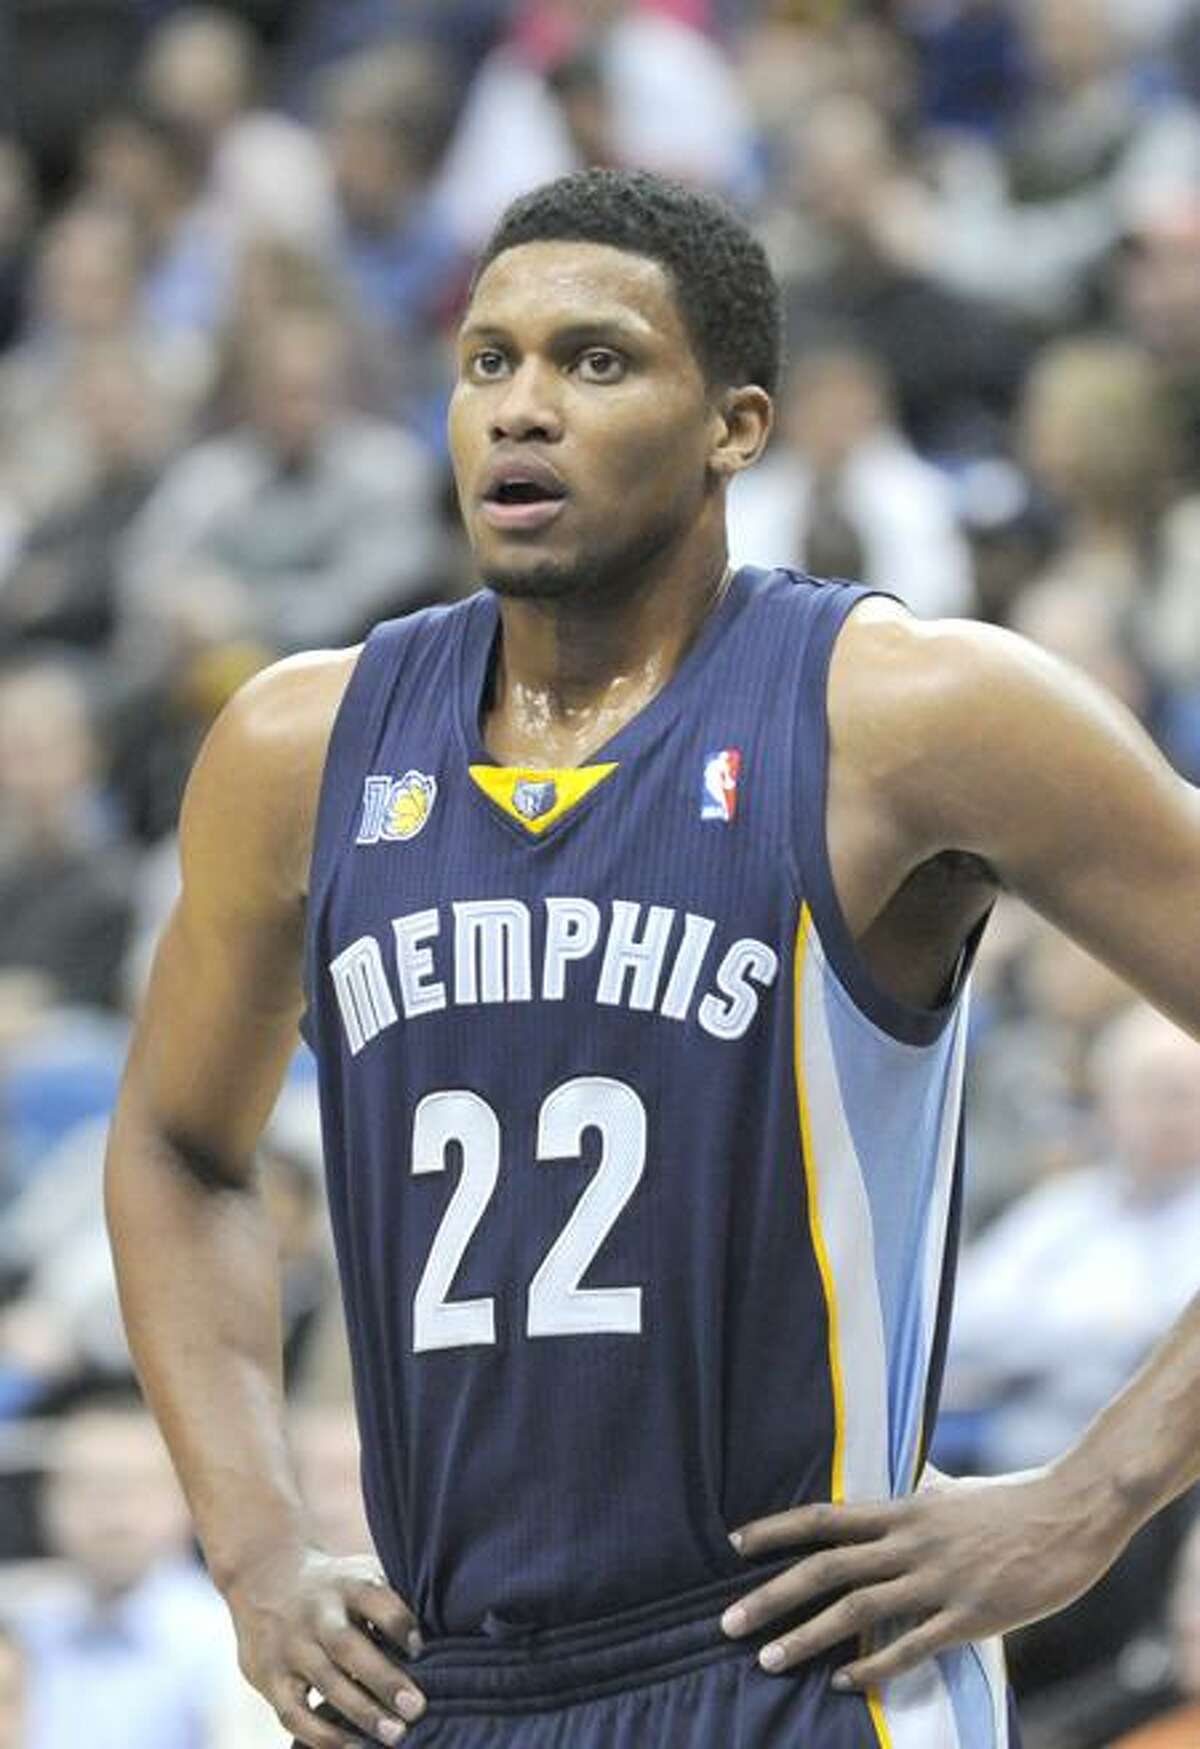 FILE - This Feb. 2, 2011, file photo shows Memphis Grizzlies' Rudy Gay during the second half of an NBA basketball game against Minnesota, in Minneapolis. Gay needs surgery on his injured left shoulder and will miss the rest of the season. The Grizzlies announced Tuesday, March 22, 2011, the team's physician Fred Azar and orthopedic surgeon James Andrews have recommended surgery for Gay's partially dislocated shoulder. (AP Photo/Jim Mone, File)